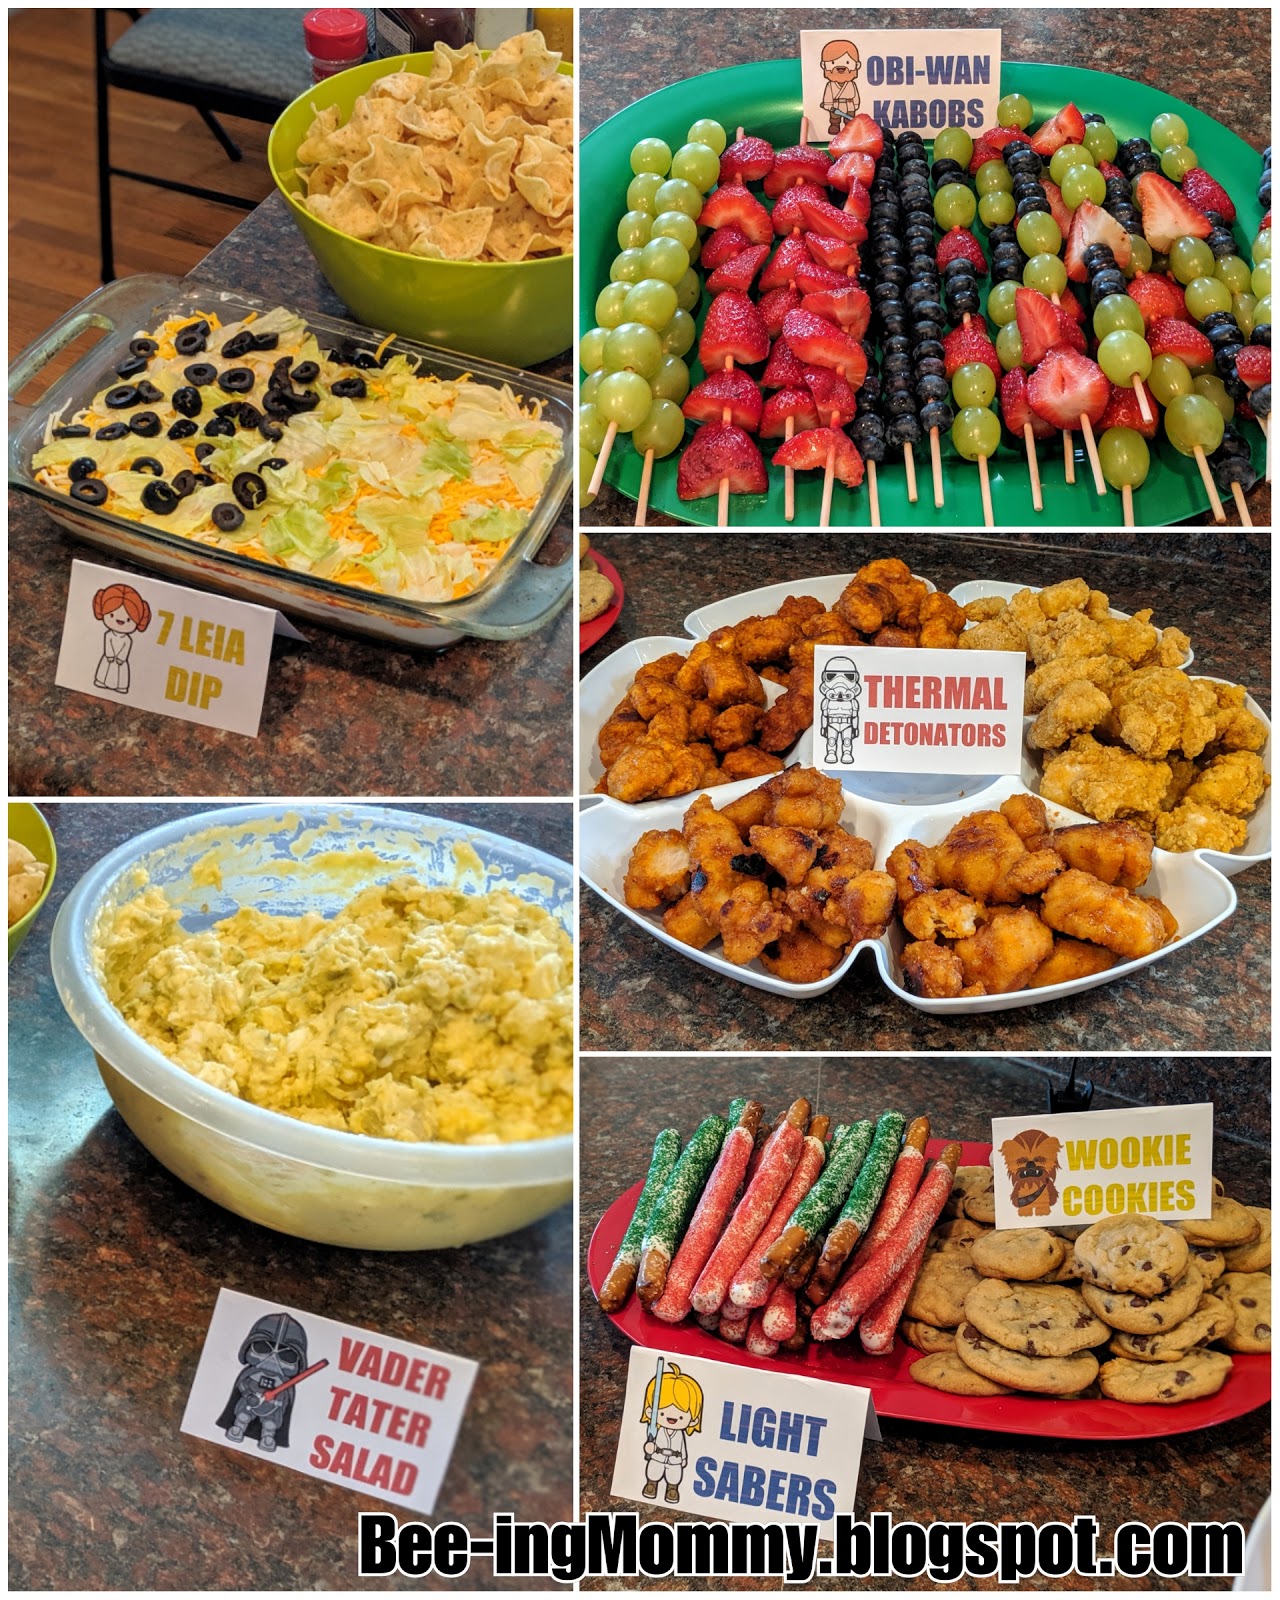 Star Wars Inspired Party Food